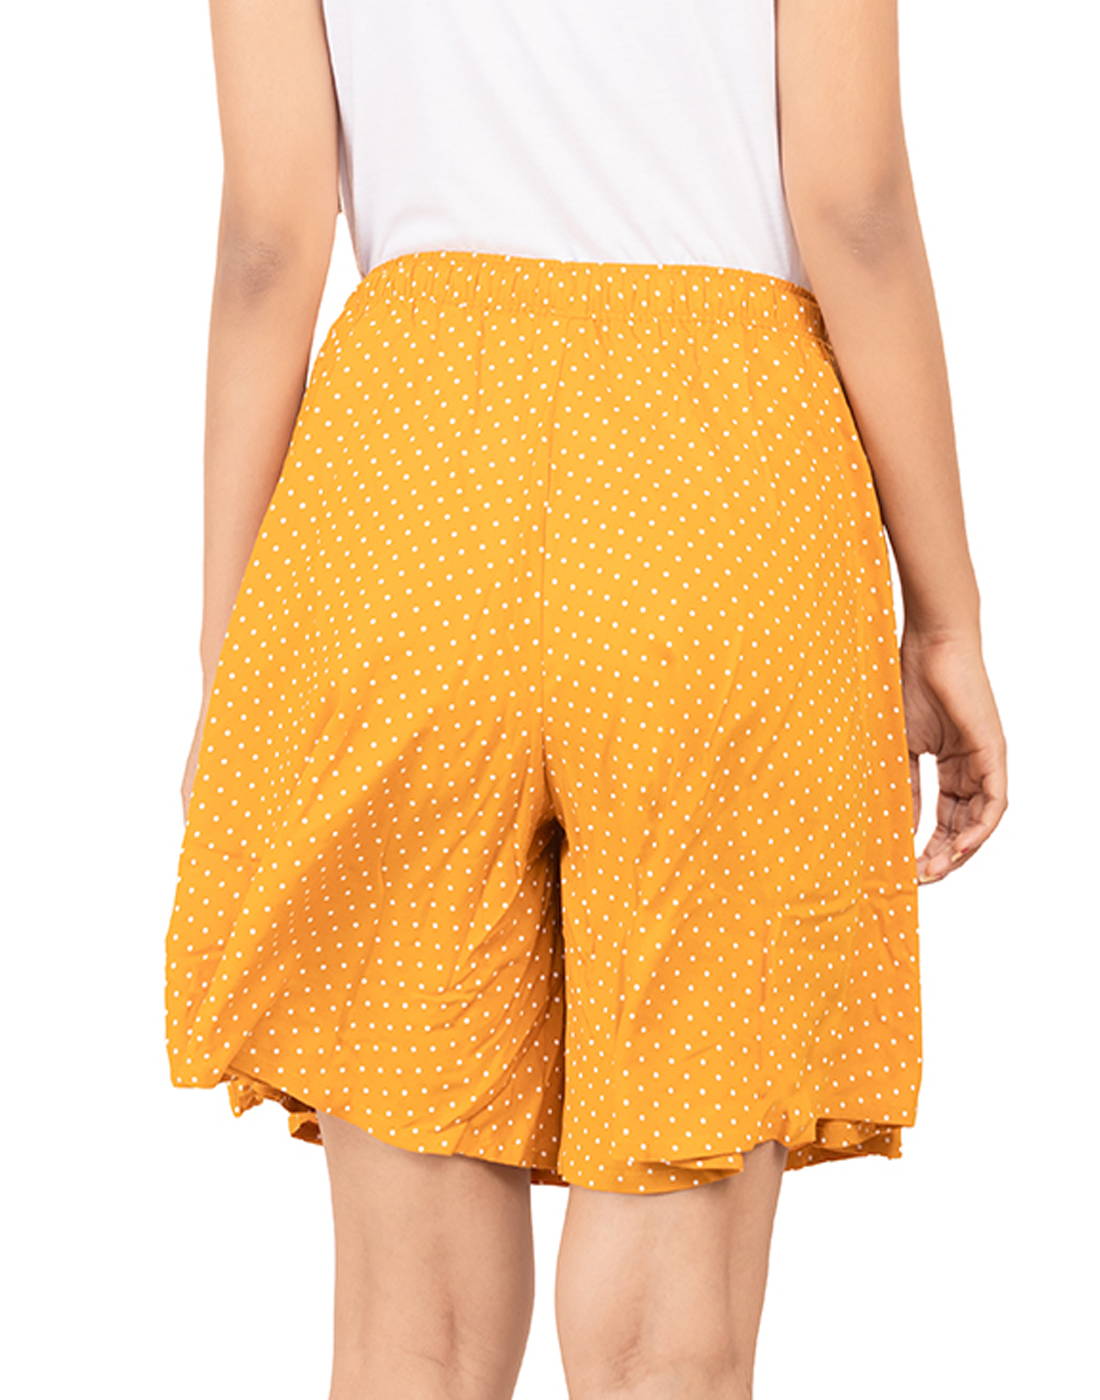 Culottes Shorts for Women-Mustard Print